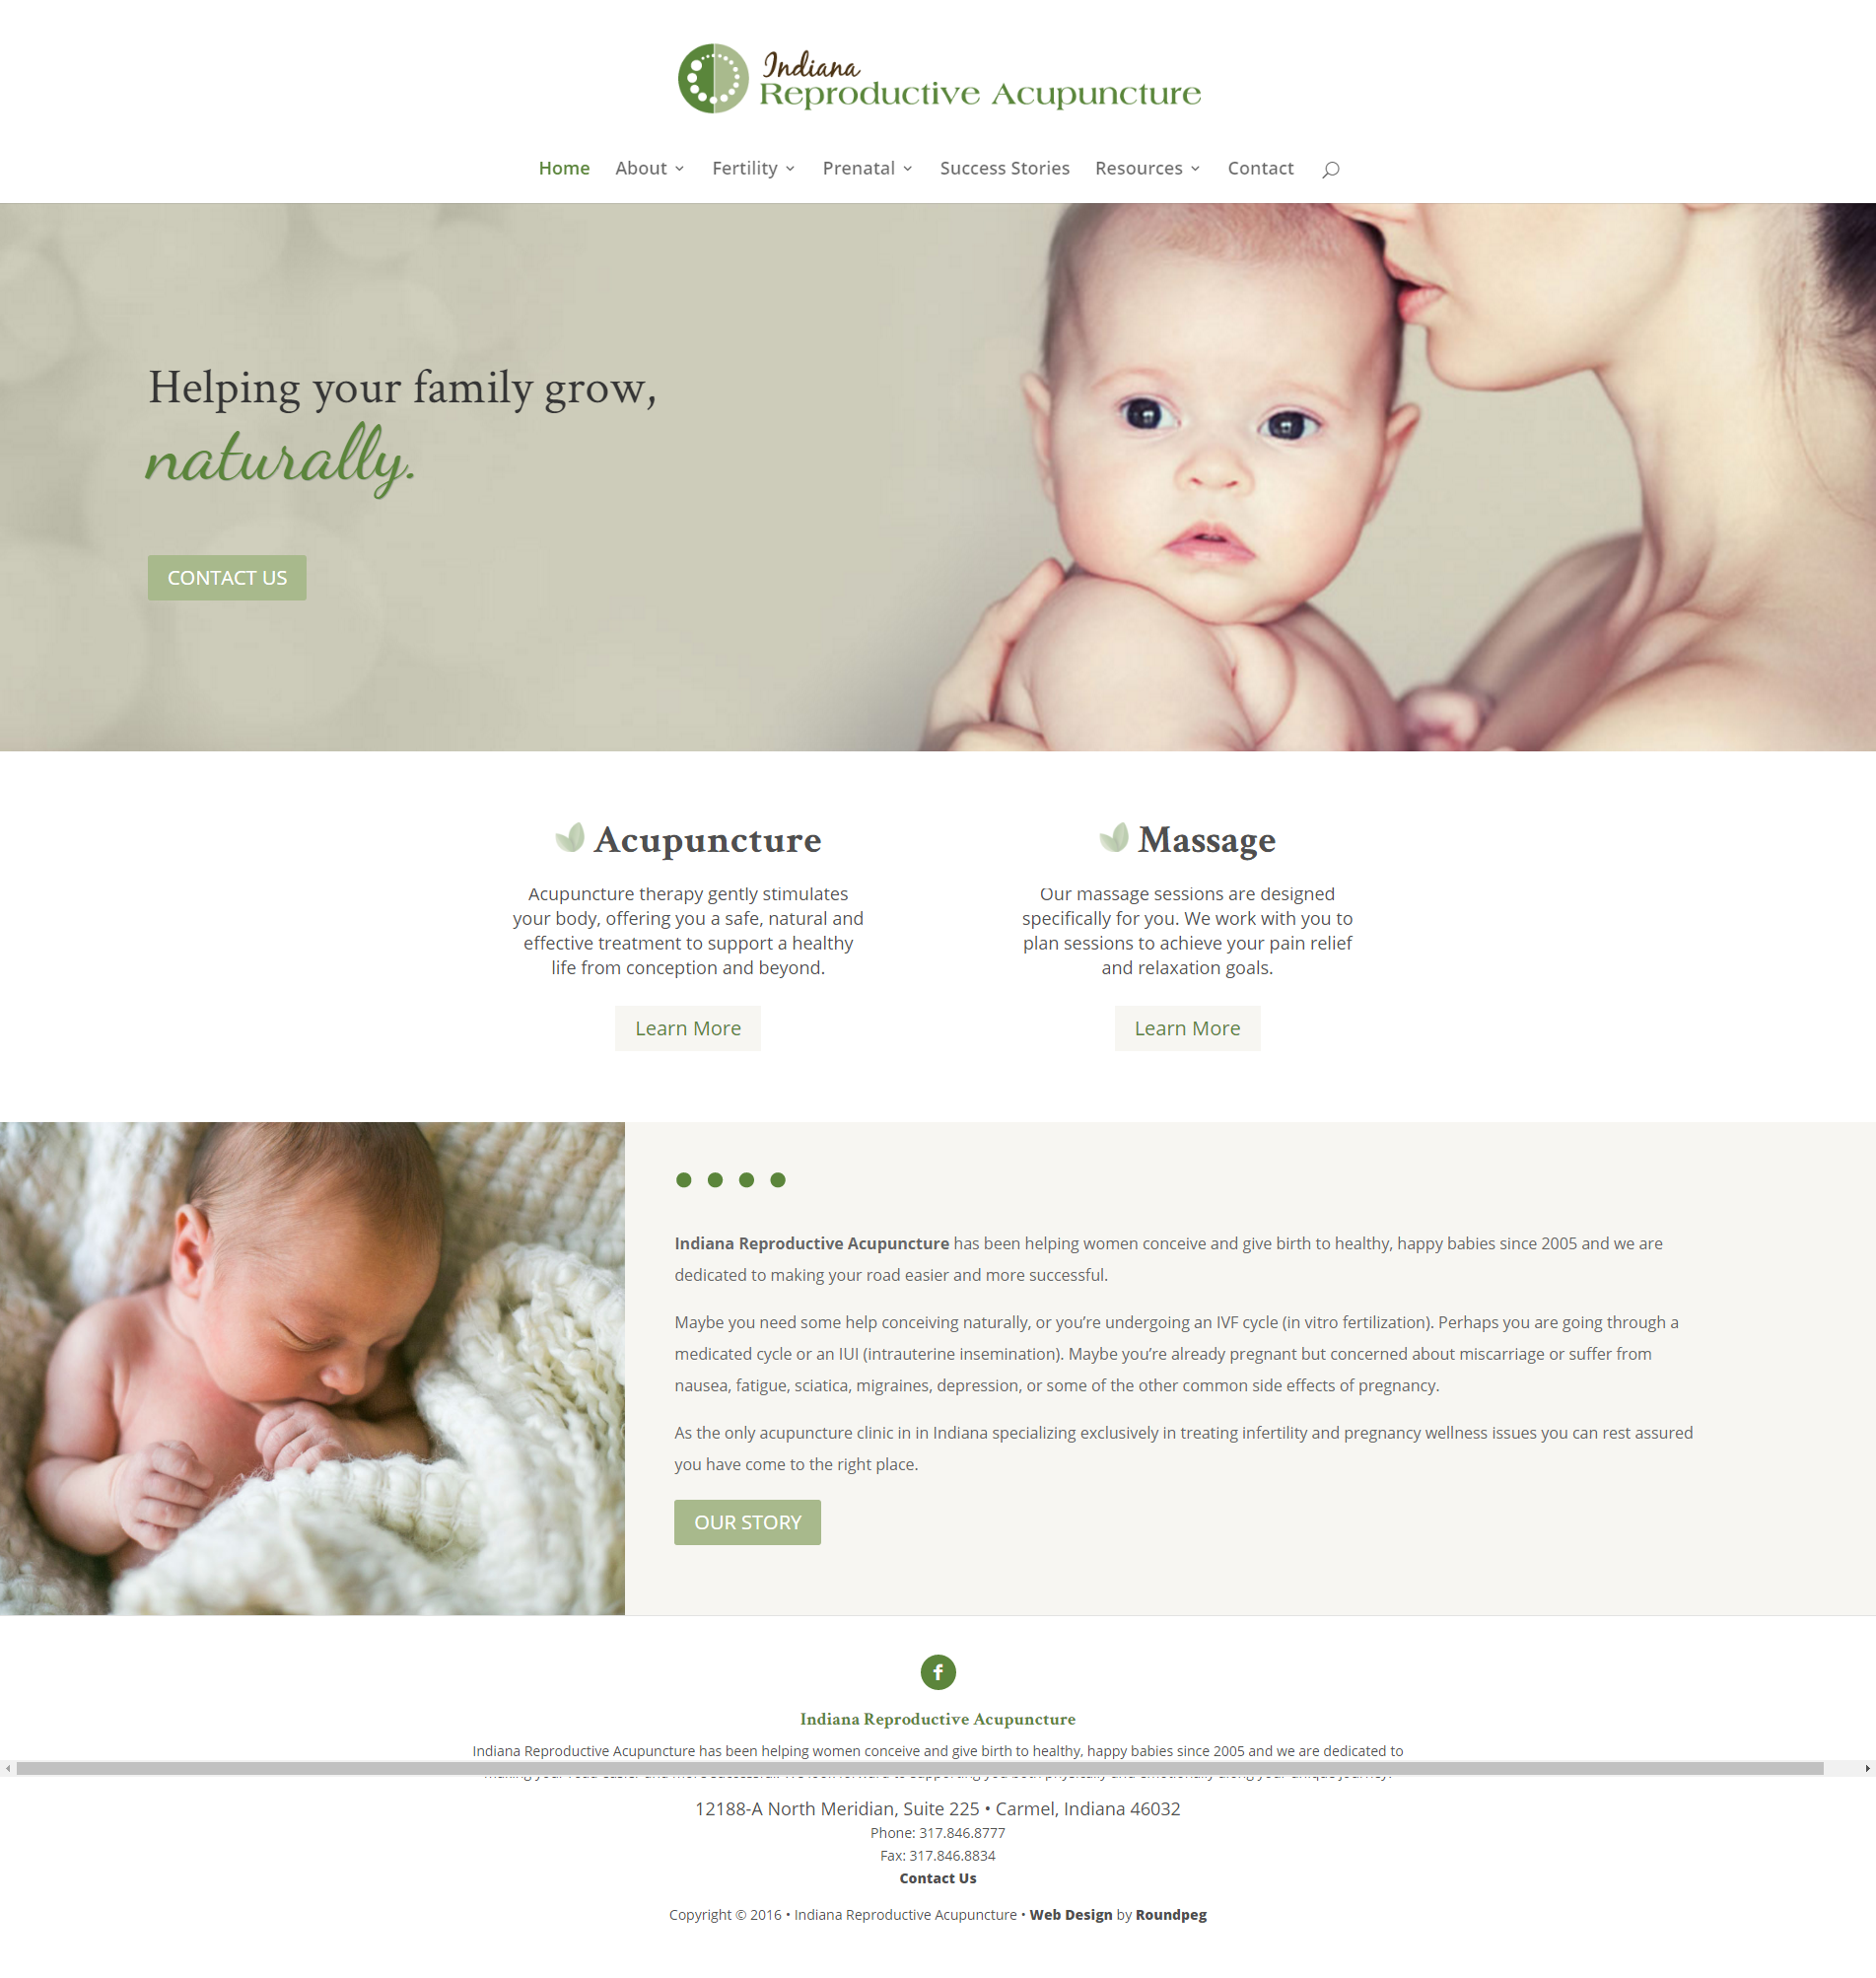 Web design example home-indiana-reproductive-acupuncture 